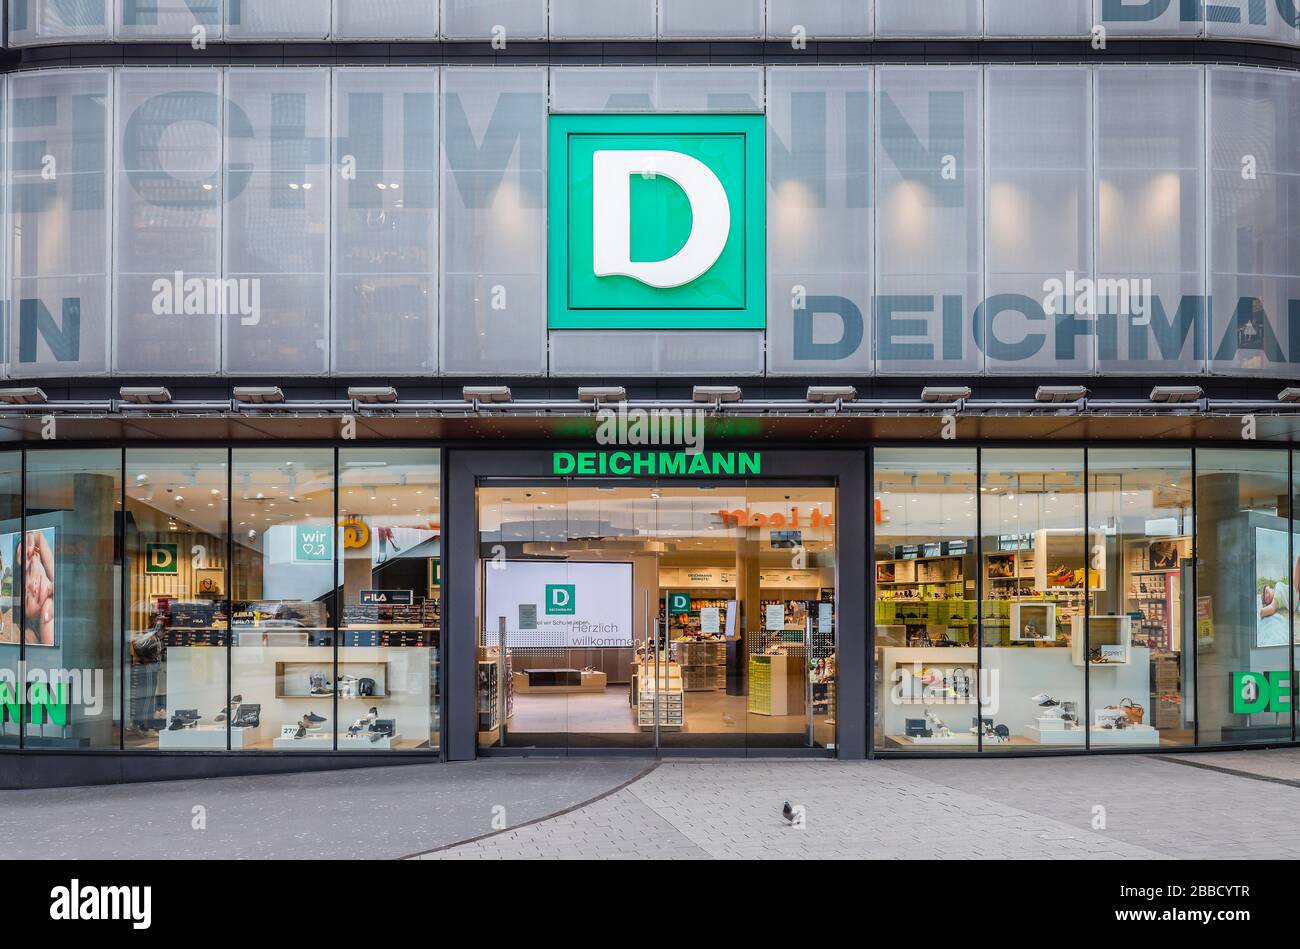 Page 2 - Deichmann High Resolution Stock Photography and Images - Alamy